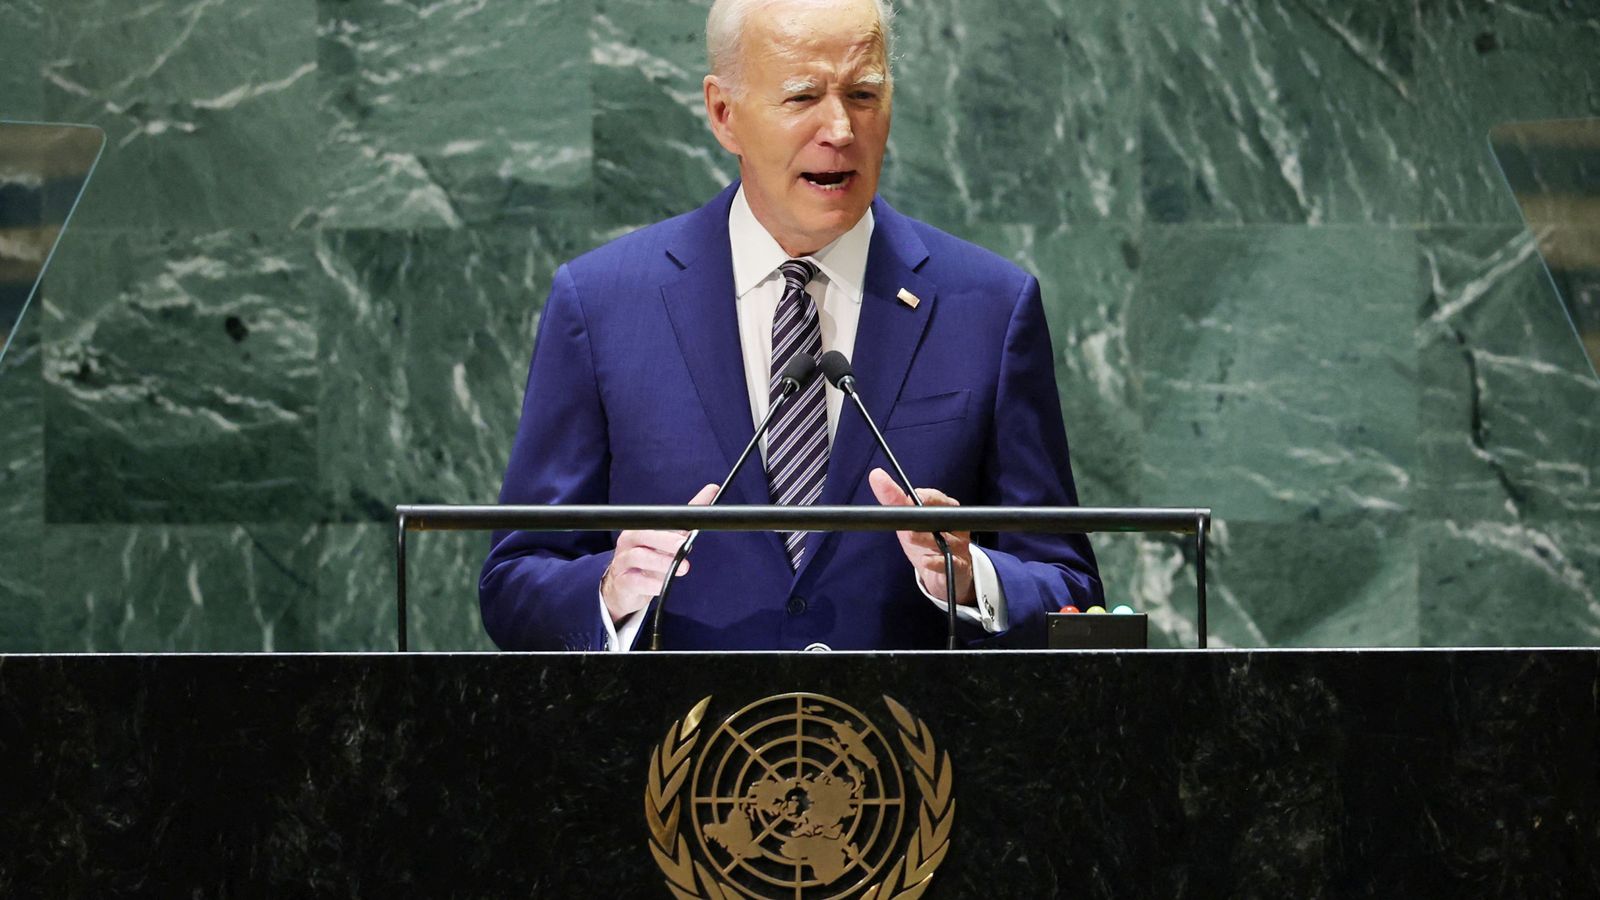 World must stand up to Russia's 'naked aggression', Joe Biden warns 